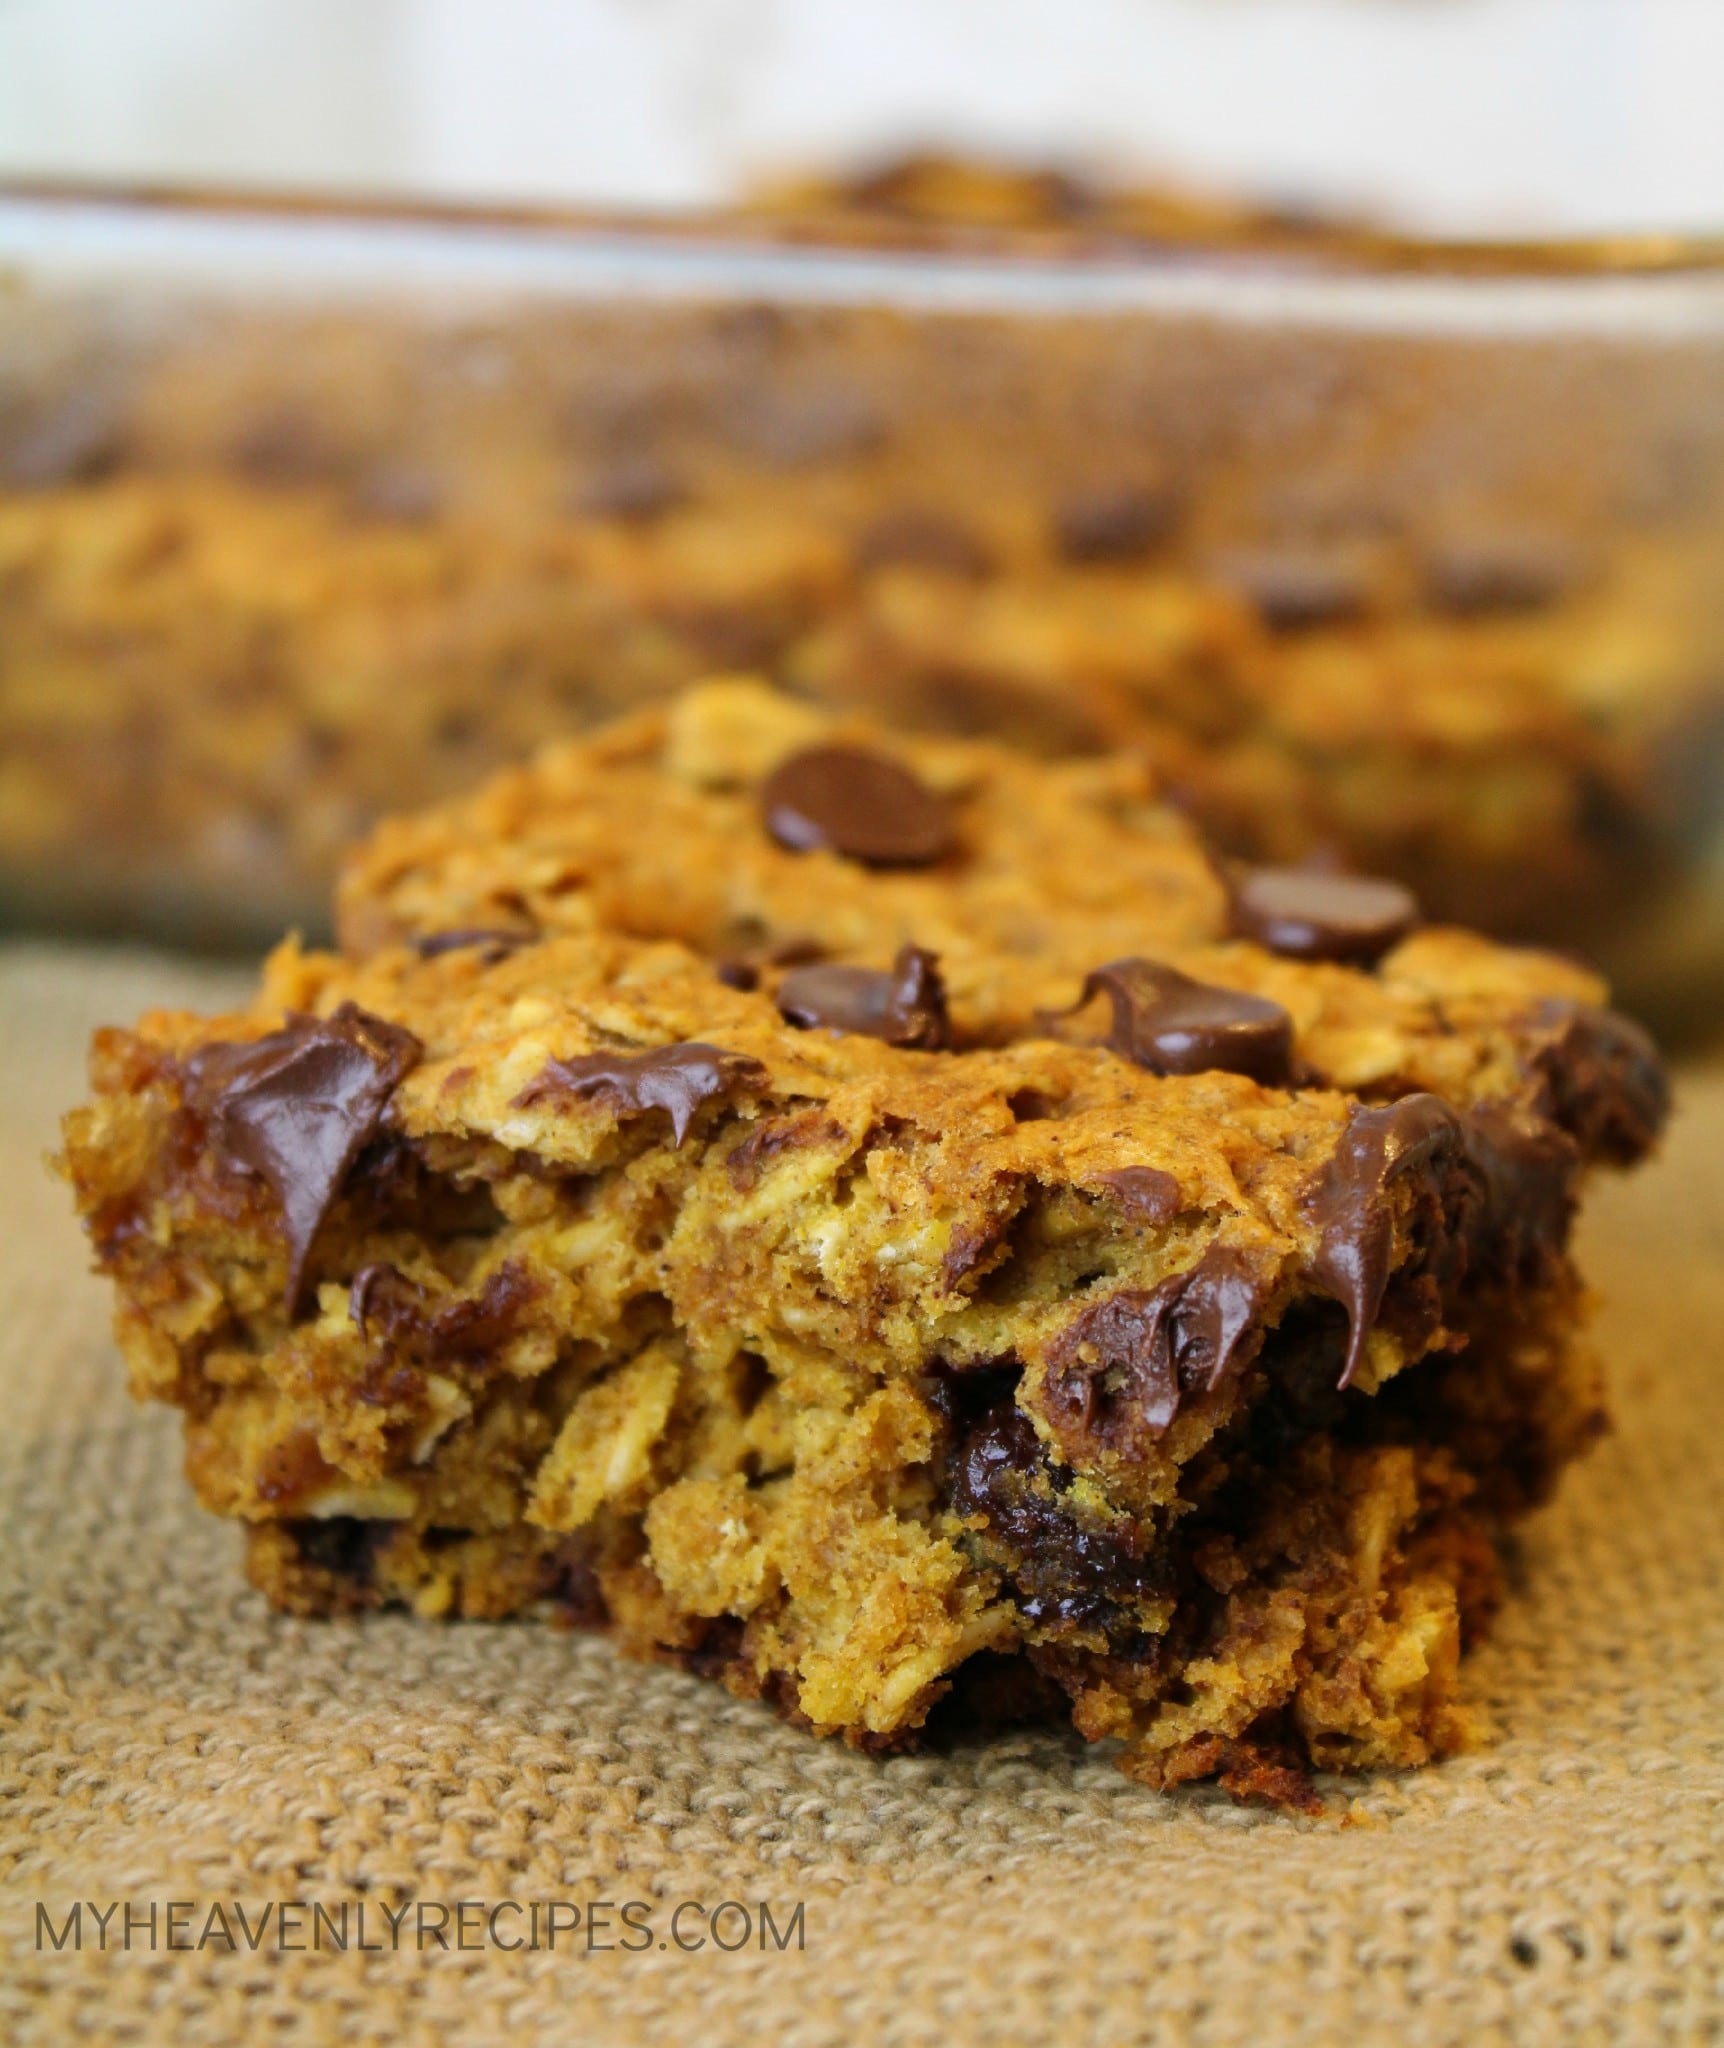 It's Pumpkin Season. Be ready with these Chocolate Chip Pumpkin Bars. They're a little piece of heaven.